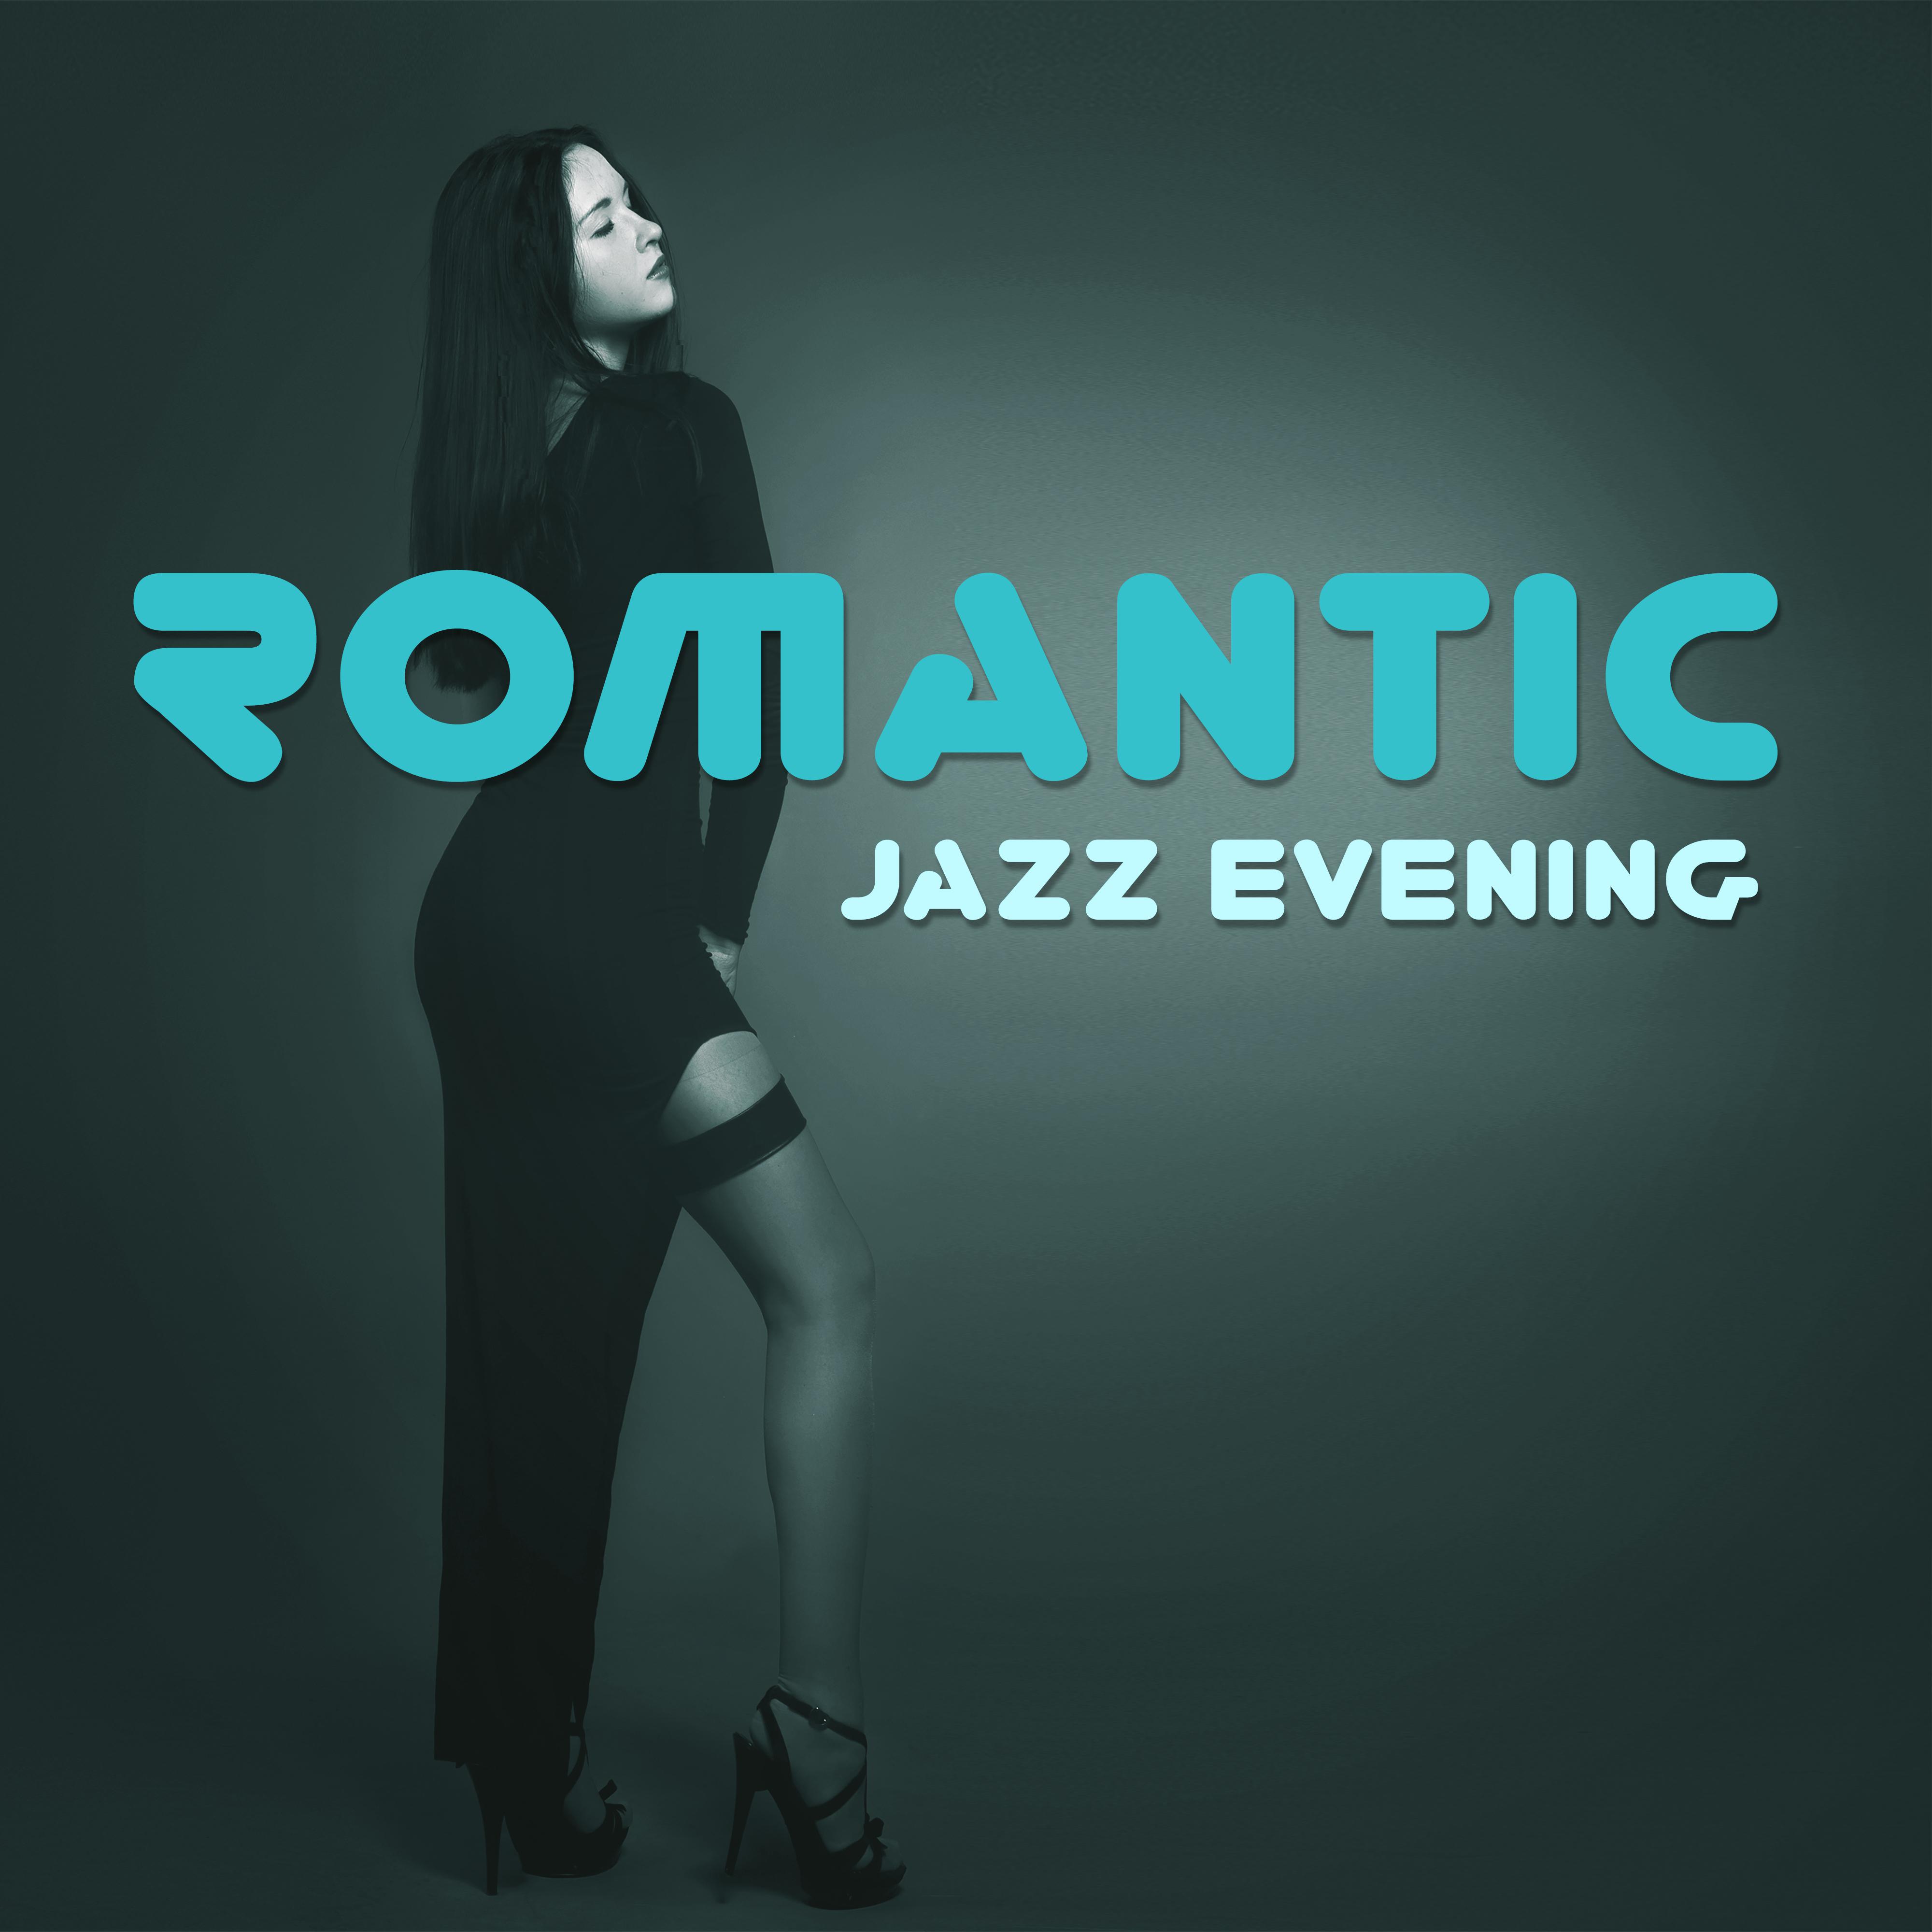 Romantic Jazz Evening – Sensual Piano Sounds, Jazz Instrumental, Relax, Dinner with Candle Light